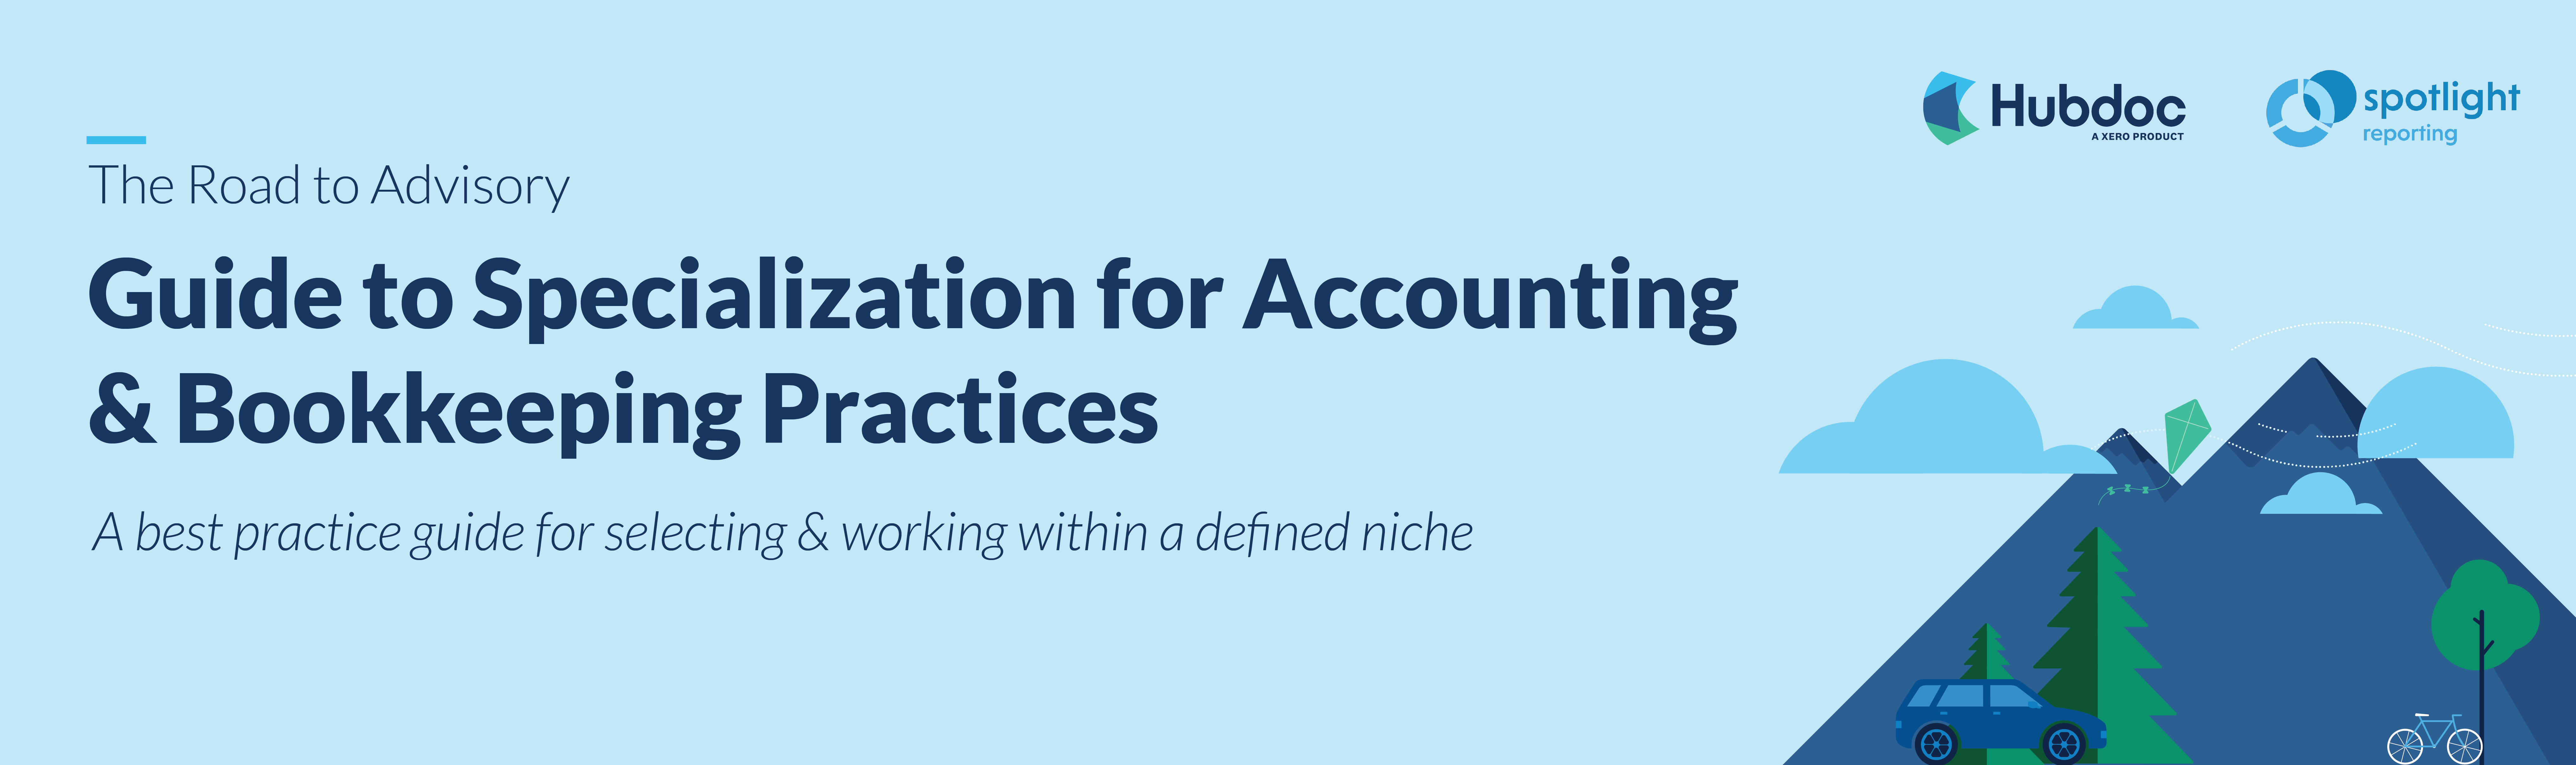 Guide to Specialization for Accounting & Bookkeeping Practices